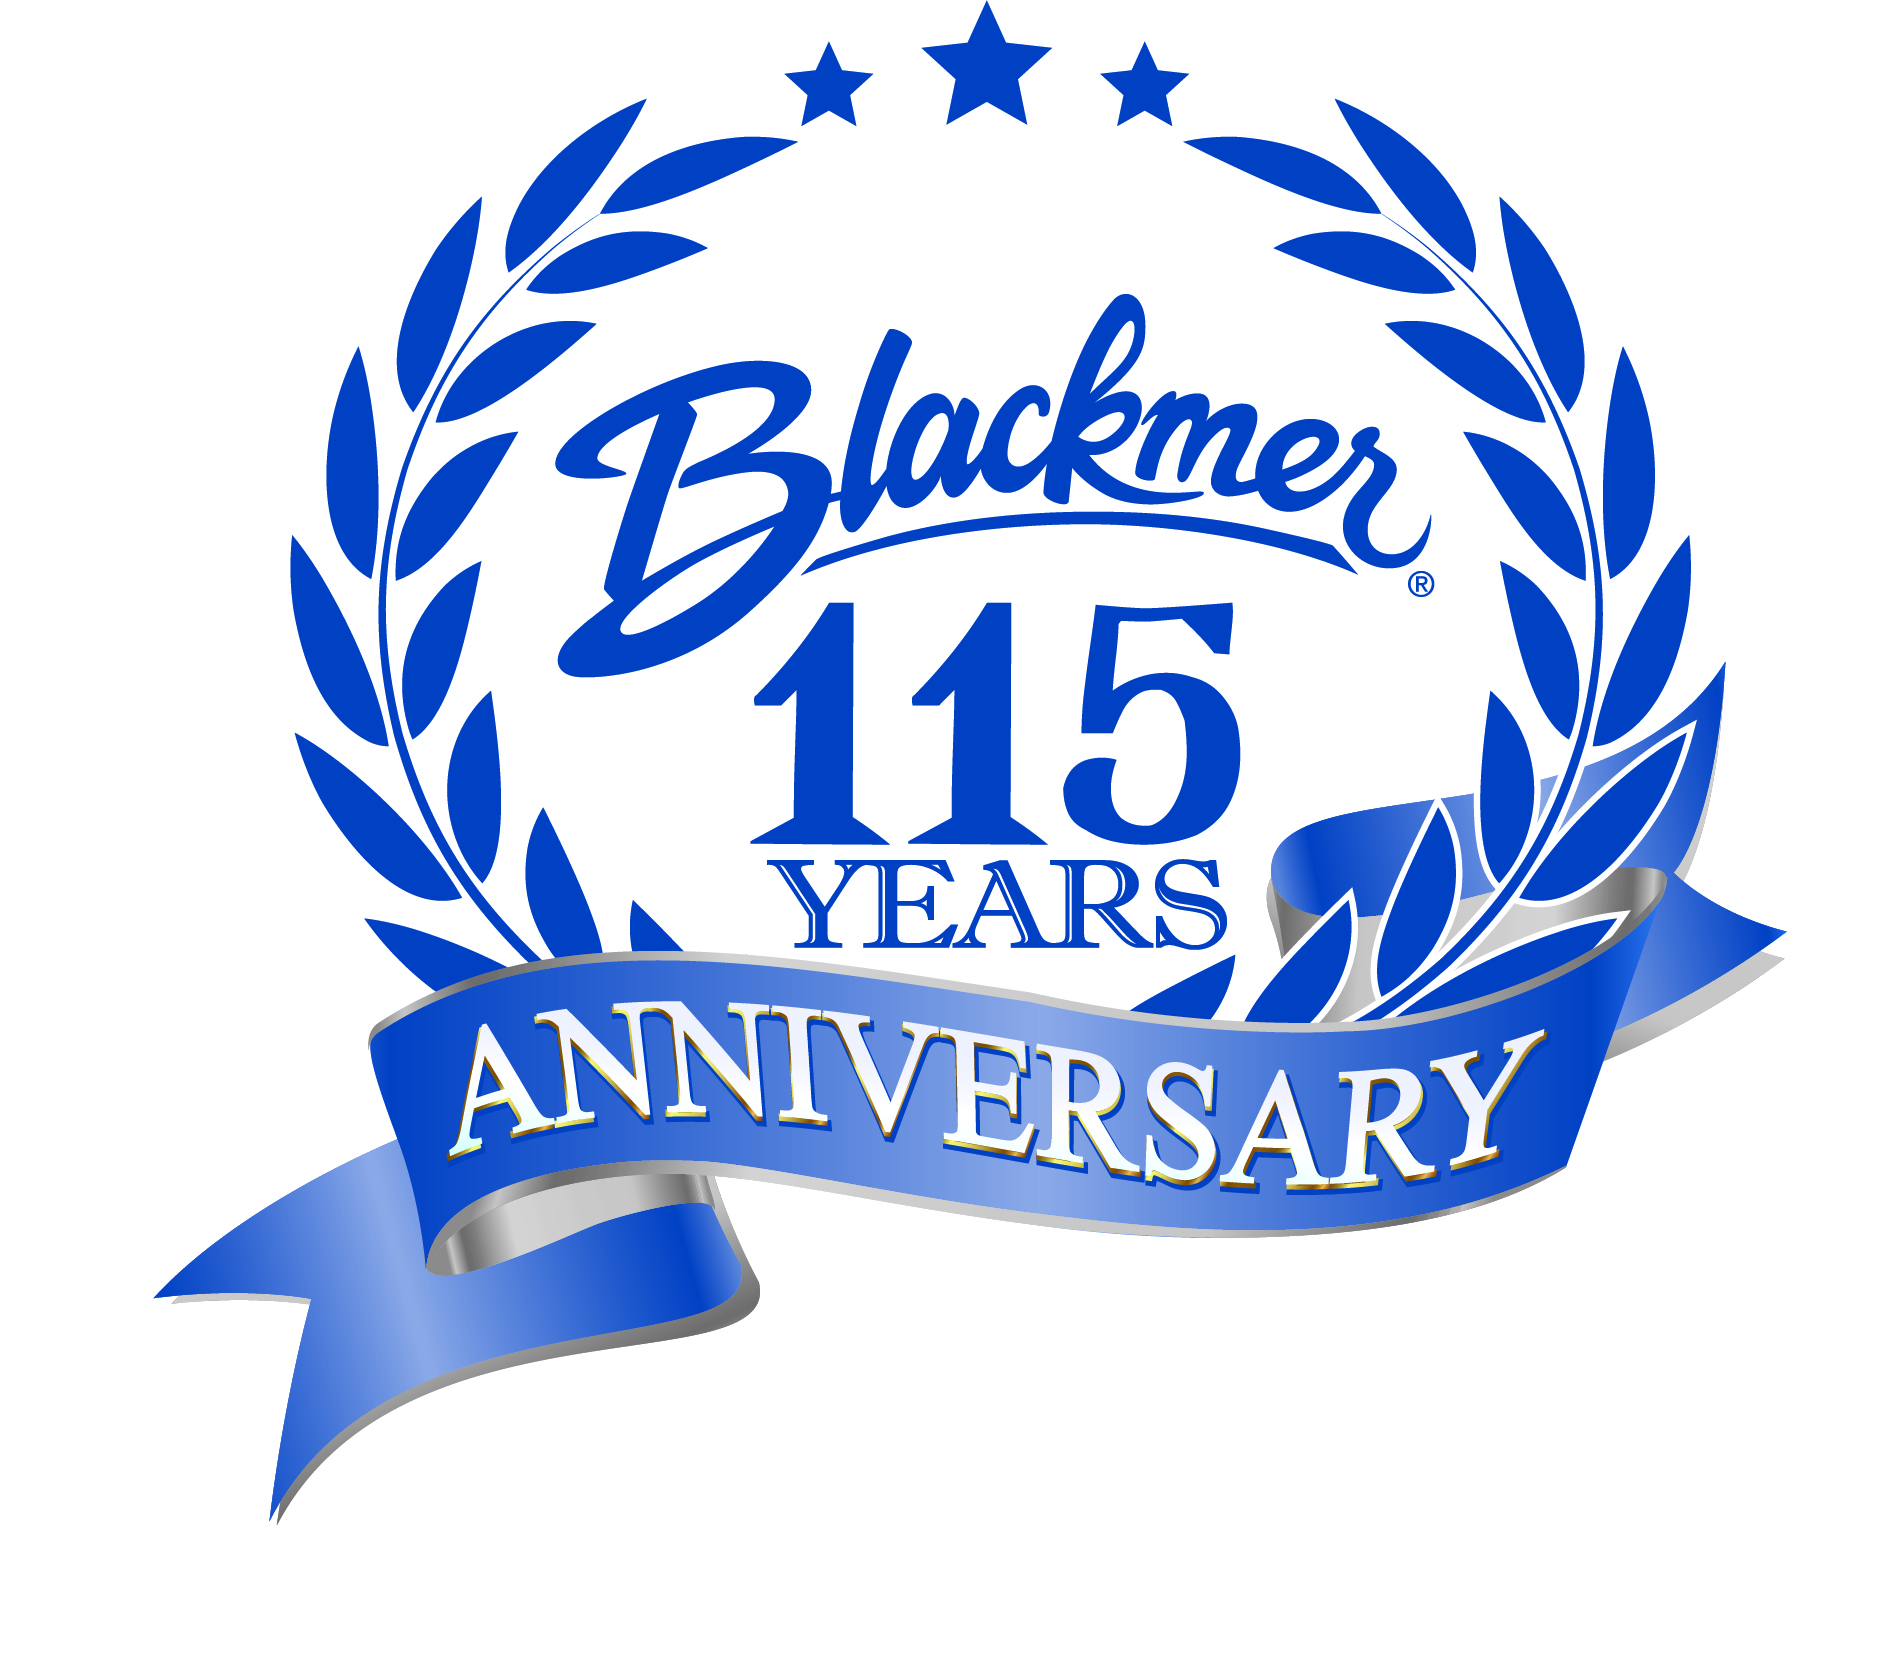 2018 is Blackmer's 115th year in pumps.